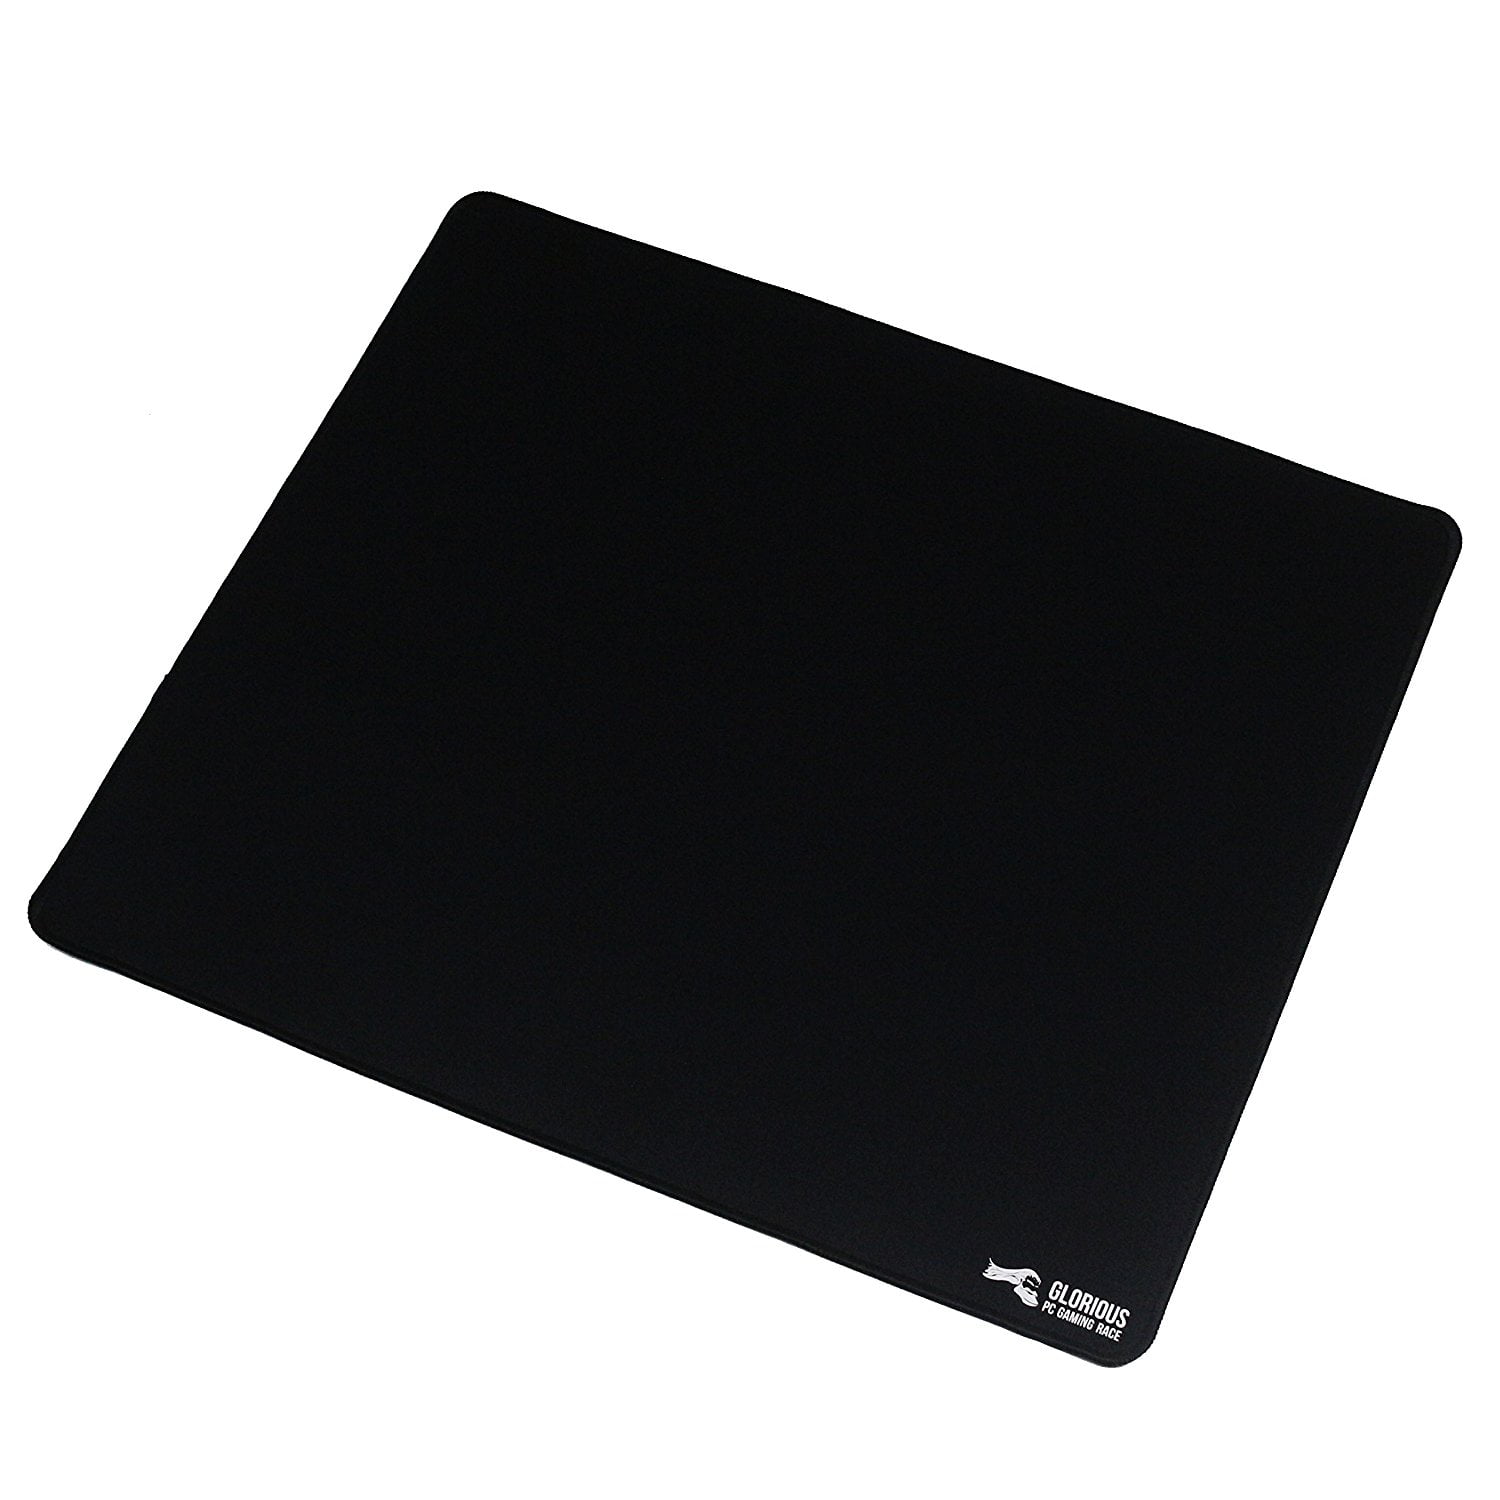 glorious gaming mouse pad / mouse mats (l, xl, extended, xxl, 3xl ...